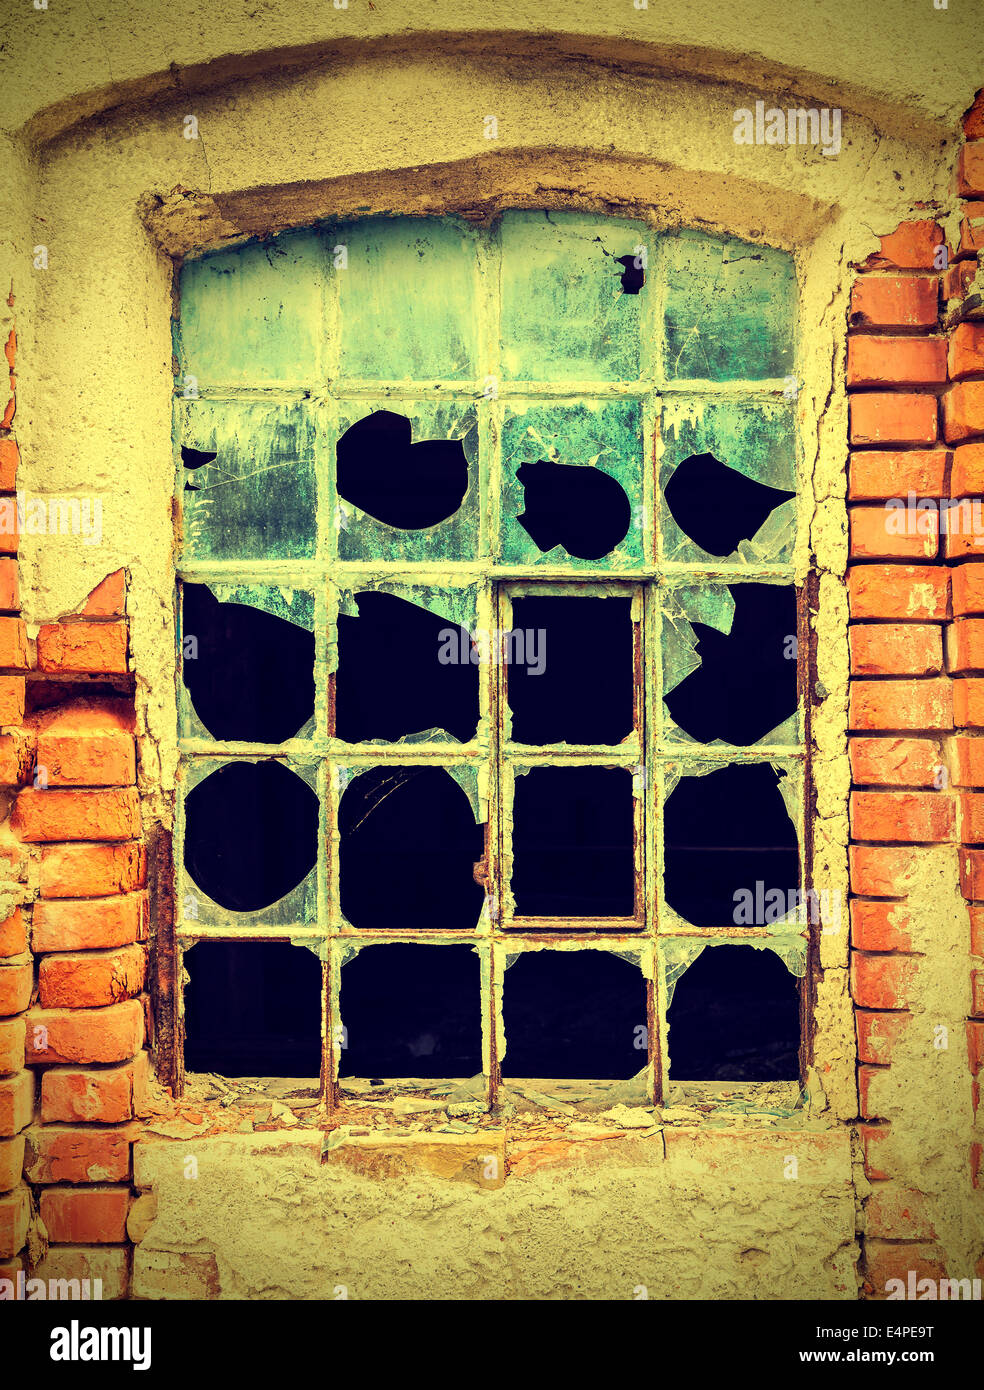 Dirty and broken glass, abandoned factory, vintage style. Stock Photo